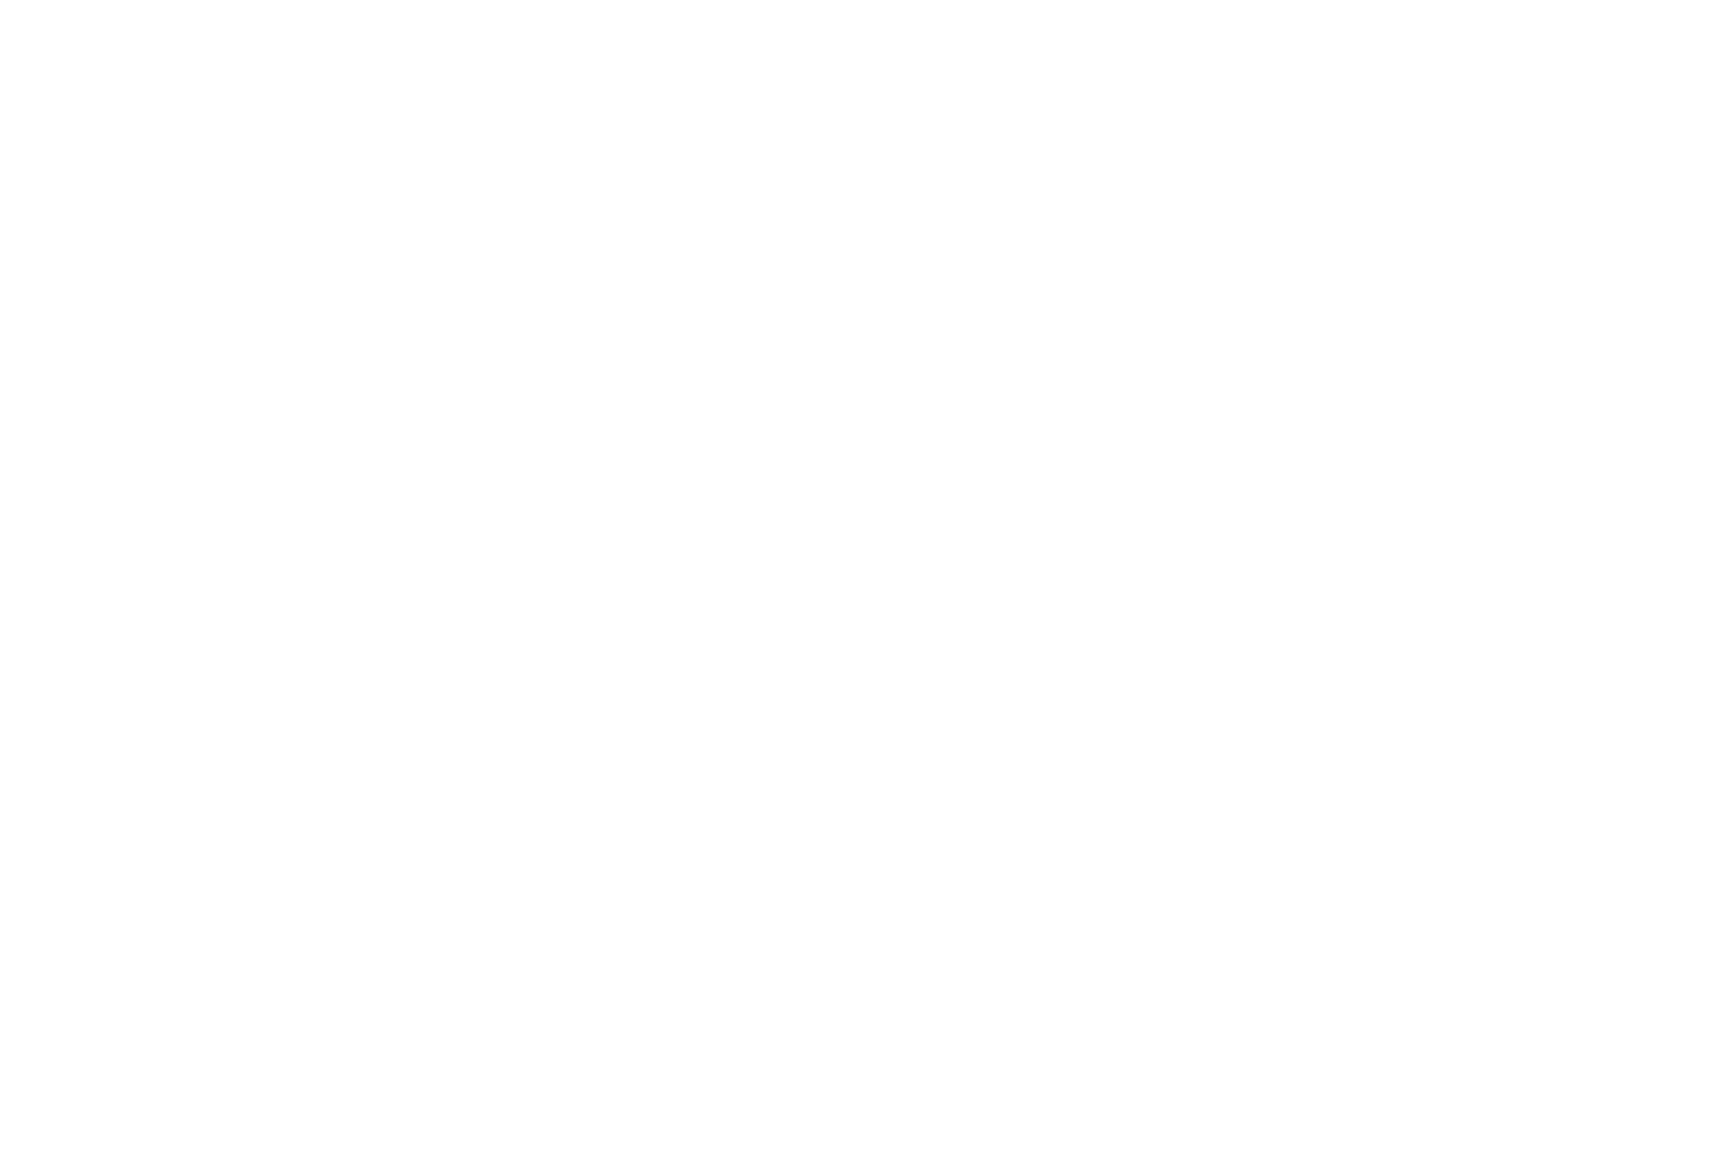 OFFICIAL SELECTION - Courage Film Festival - 2019.png